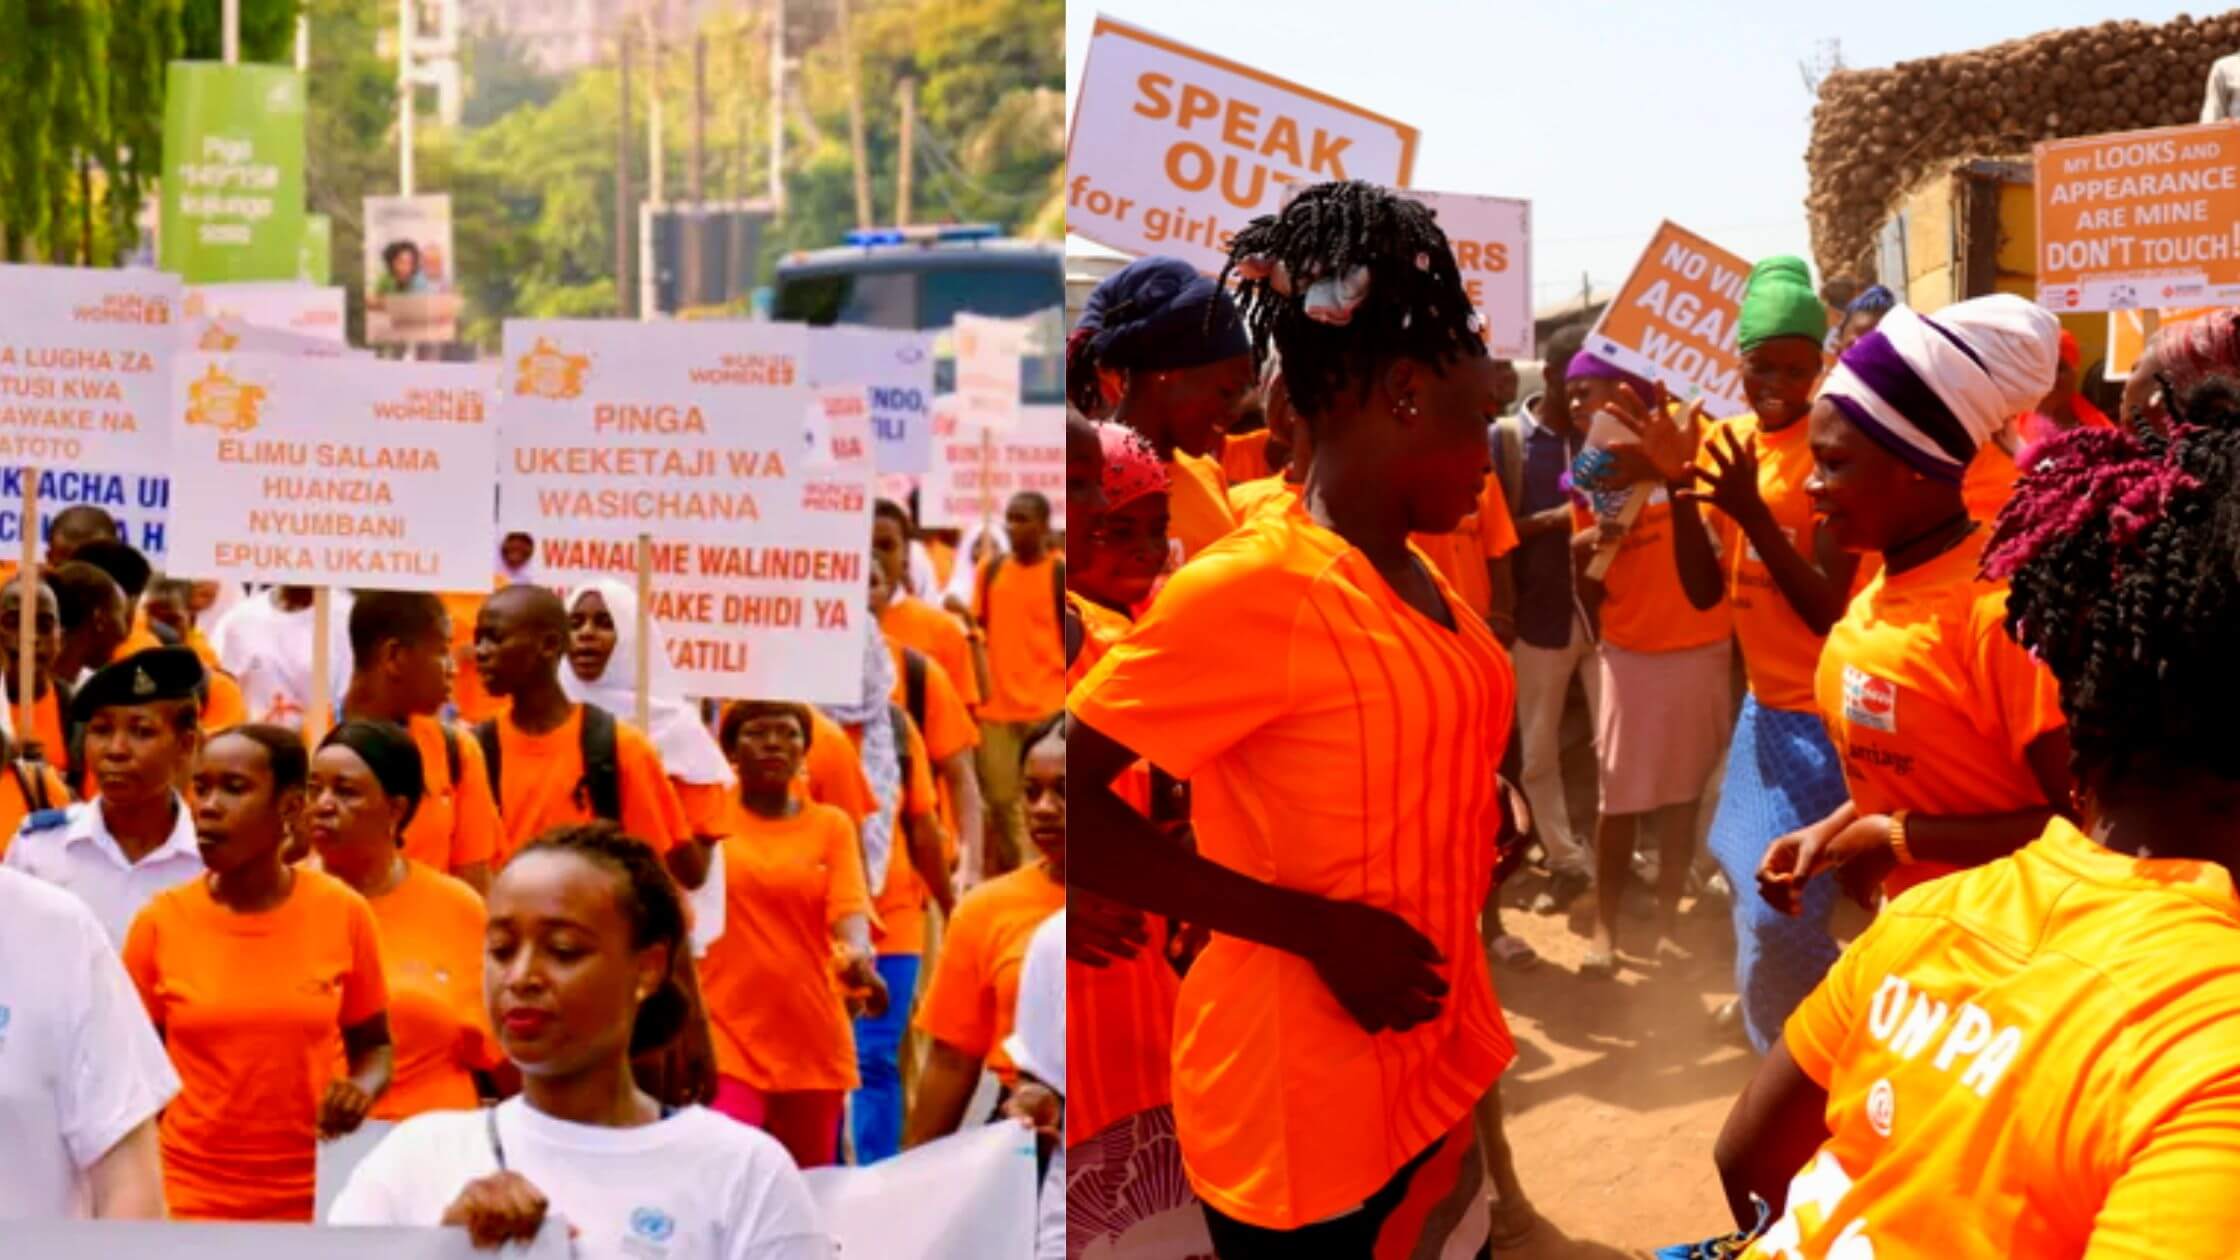 16 Days Of Activism Aiming To Put A Stop To Gender-Based Violence